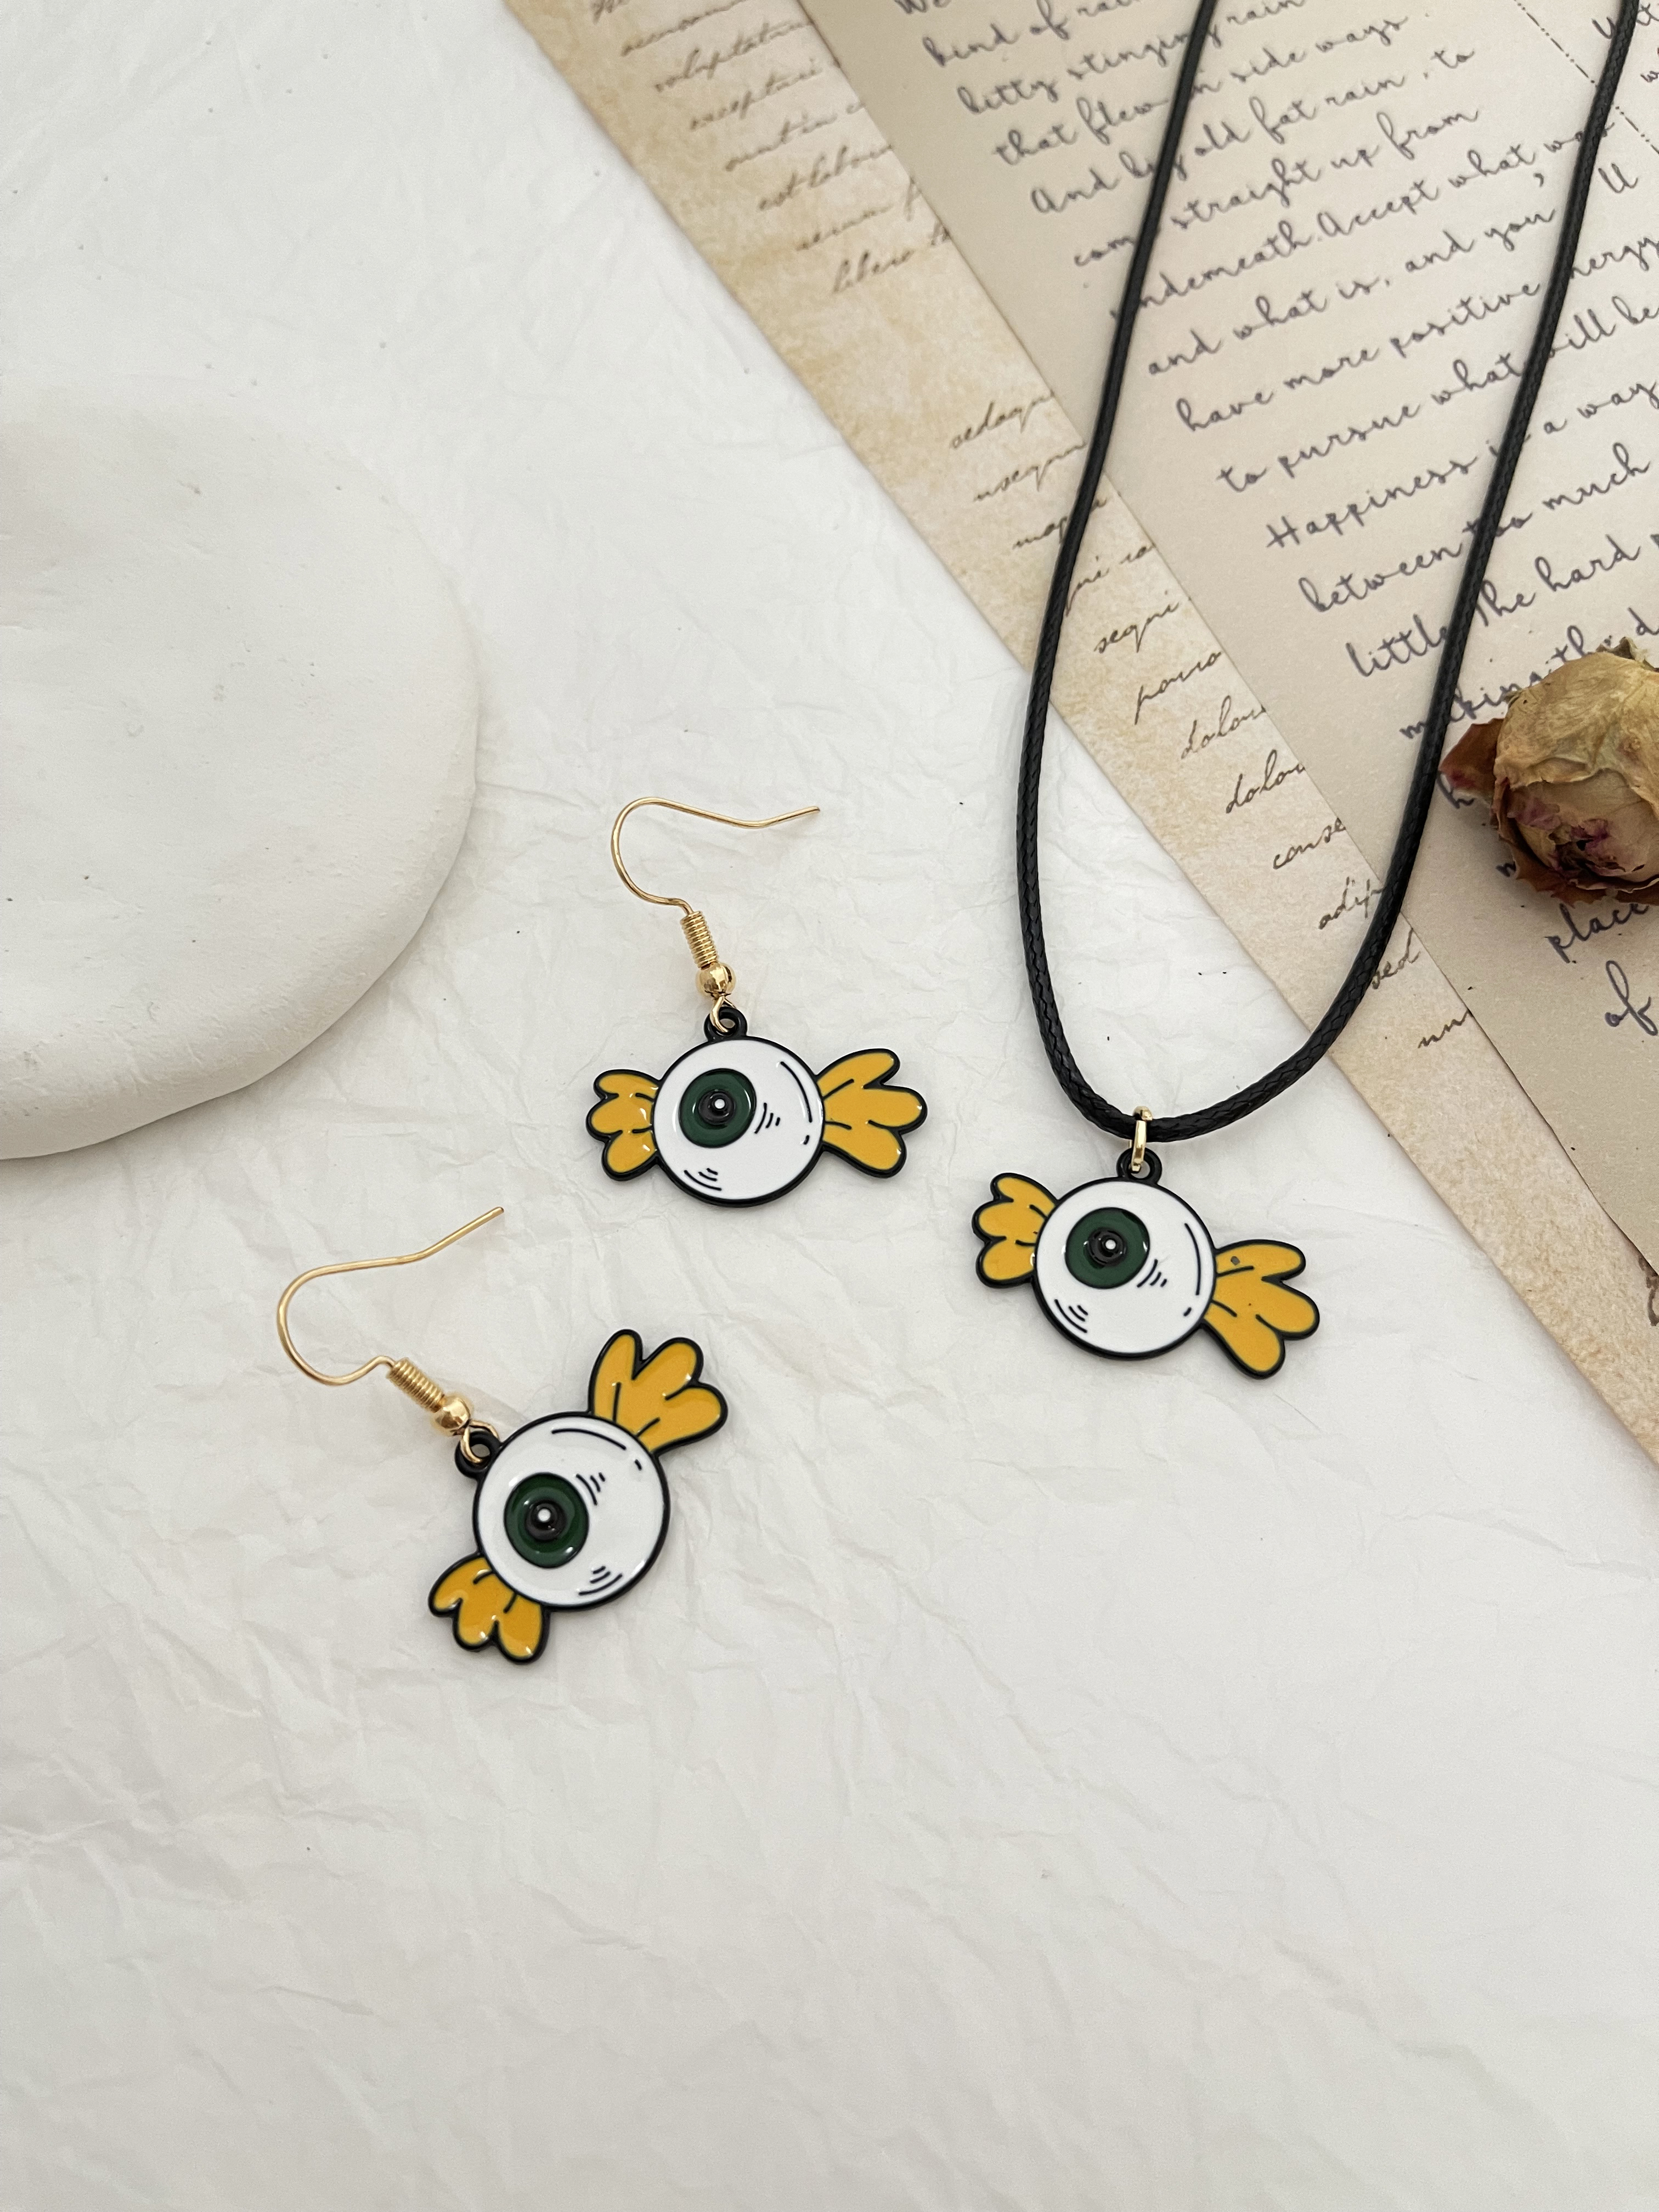 Fashion Color Alloy Drop Oil Halloween Candy Eye Pu Necklace